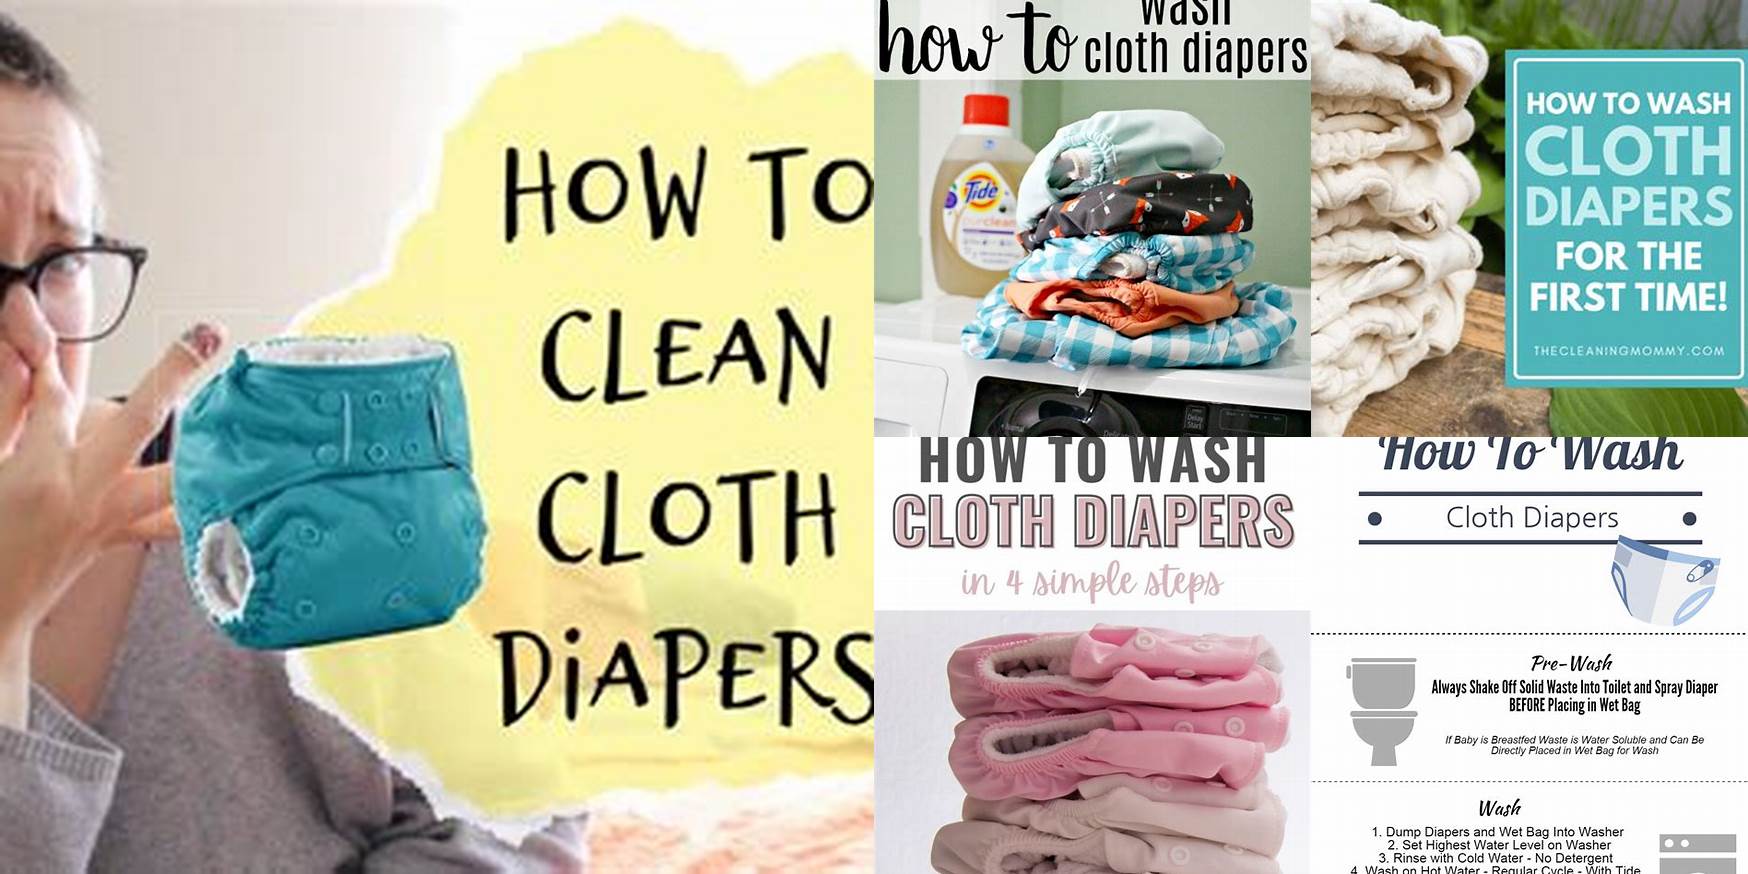 How To Wash A Cloth Diaper